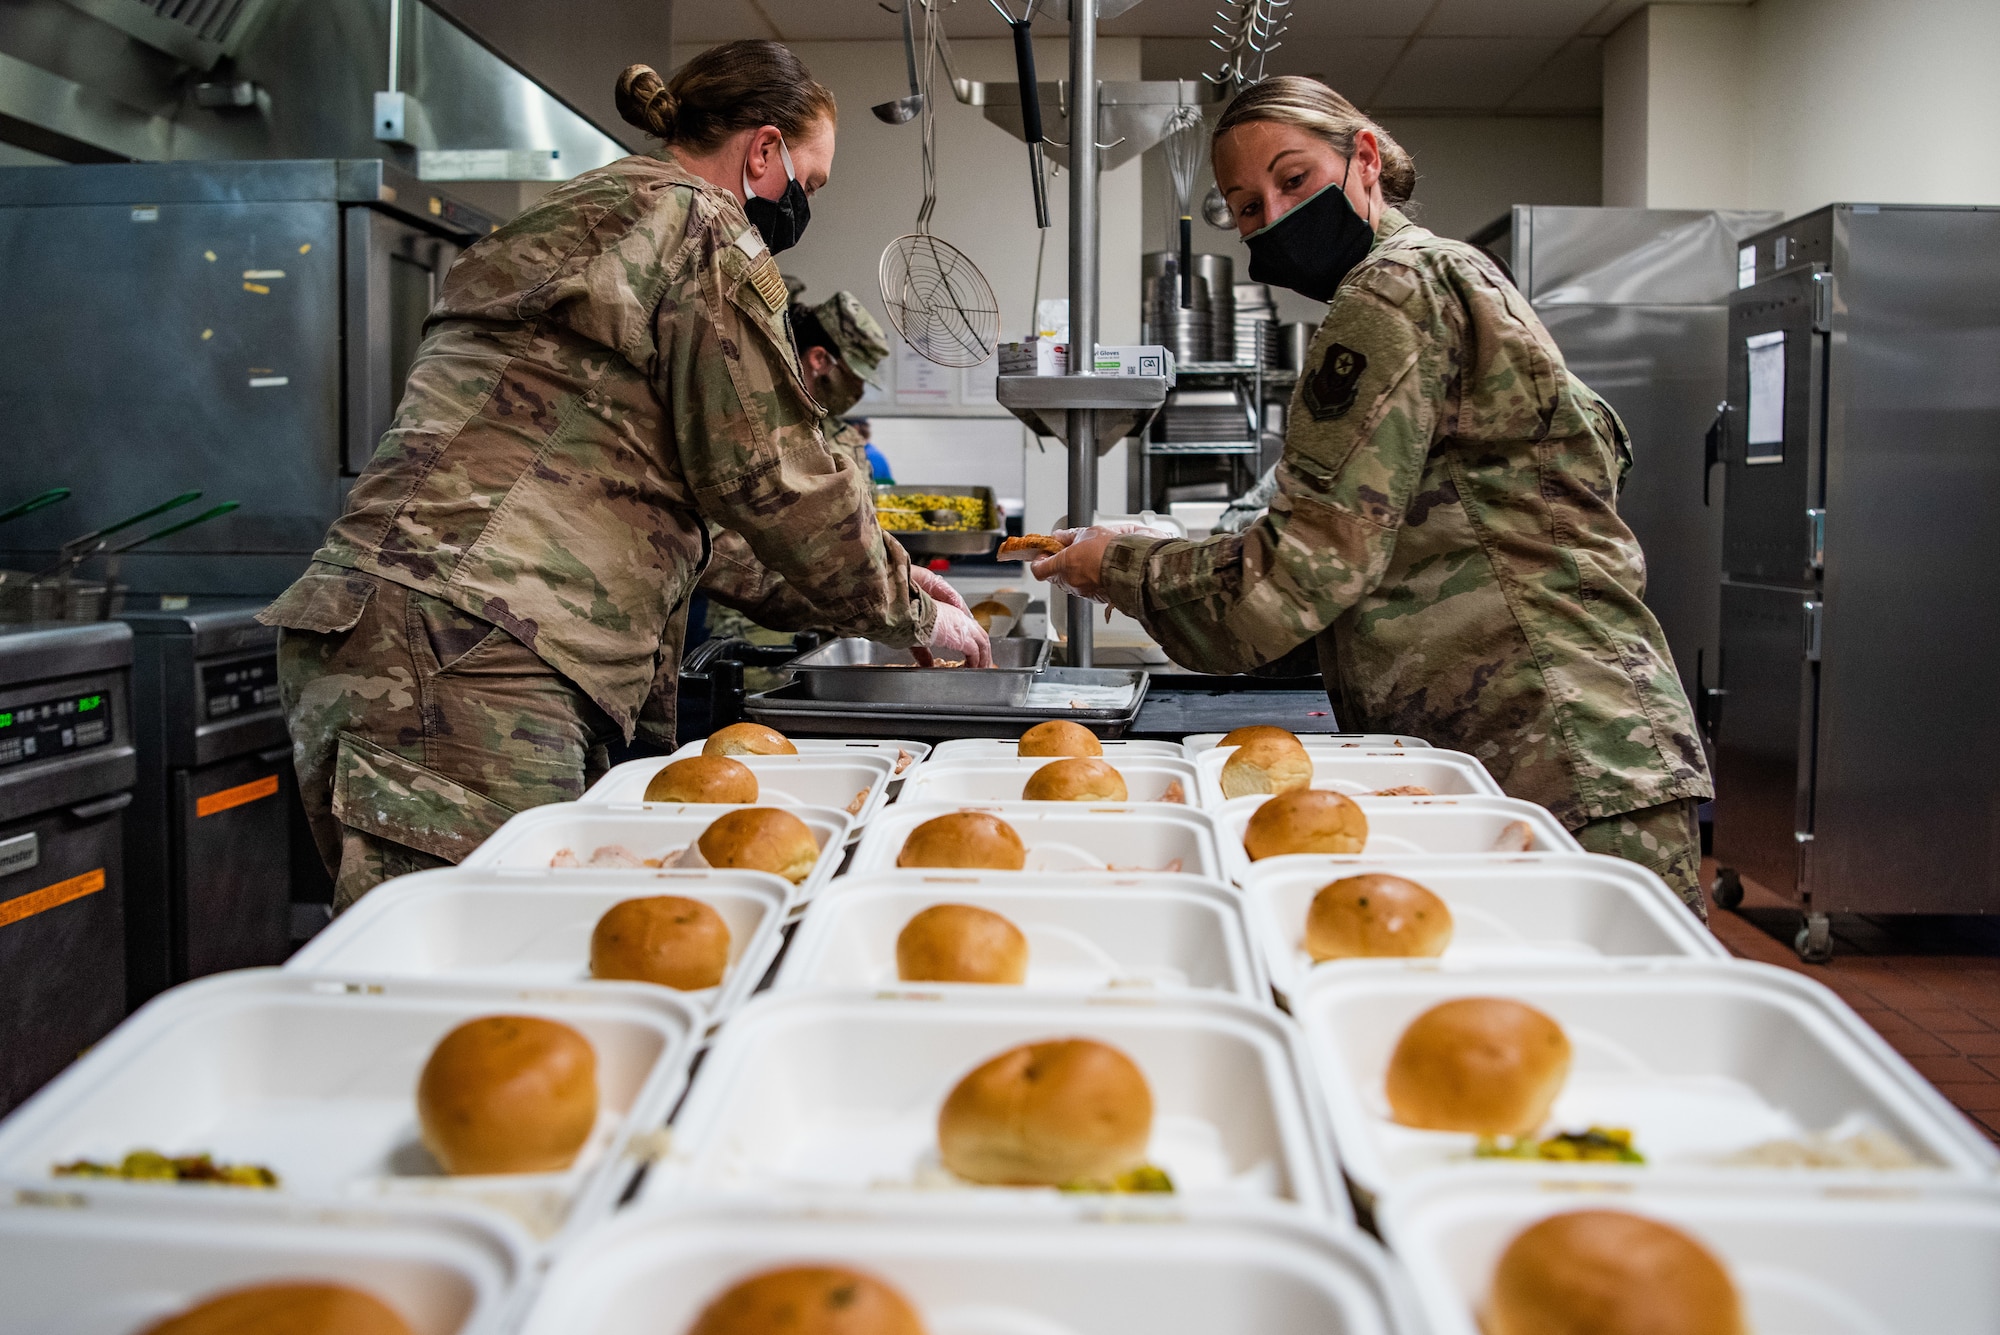 Airmen prepare to go meals at the dining facility